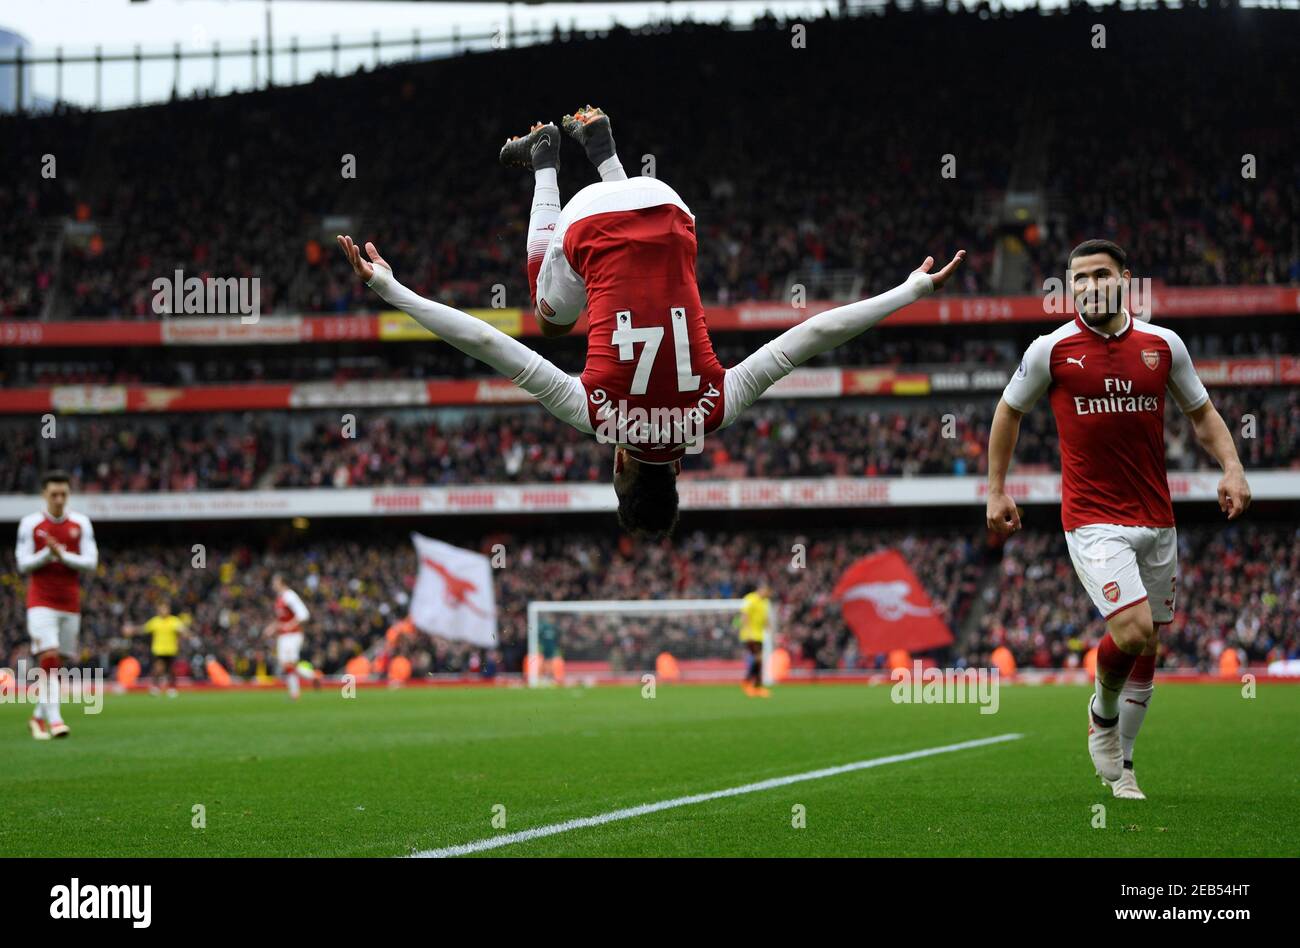 Soccer Football - Premier League - Arsenal vs Watford - Emirates Stadium, London, Britain - March 11, 2018   Arsenal's Pierre-Emerick Aubameyang celebrates scoring their second goal            Action Images via Reuters/Tony O'Brien    EDITORIAL USE ONLY. No use with unauthorized audio, video, data, fixture lists, club/league logos or 'live' services. Online in-match use limited to 75 images, no video emulation. No use in betting, games or single club/league/player publications.  Please contact your account representative for further details. Stock Photo